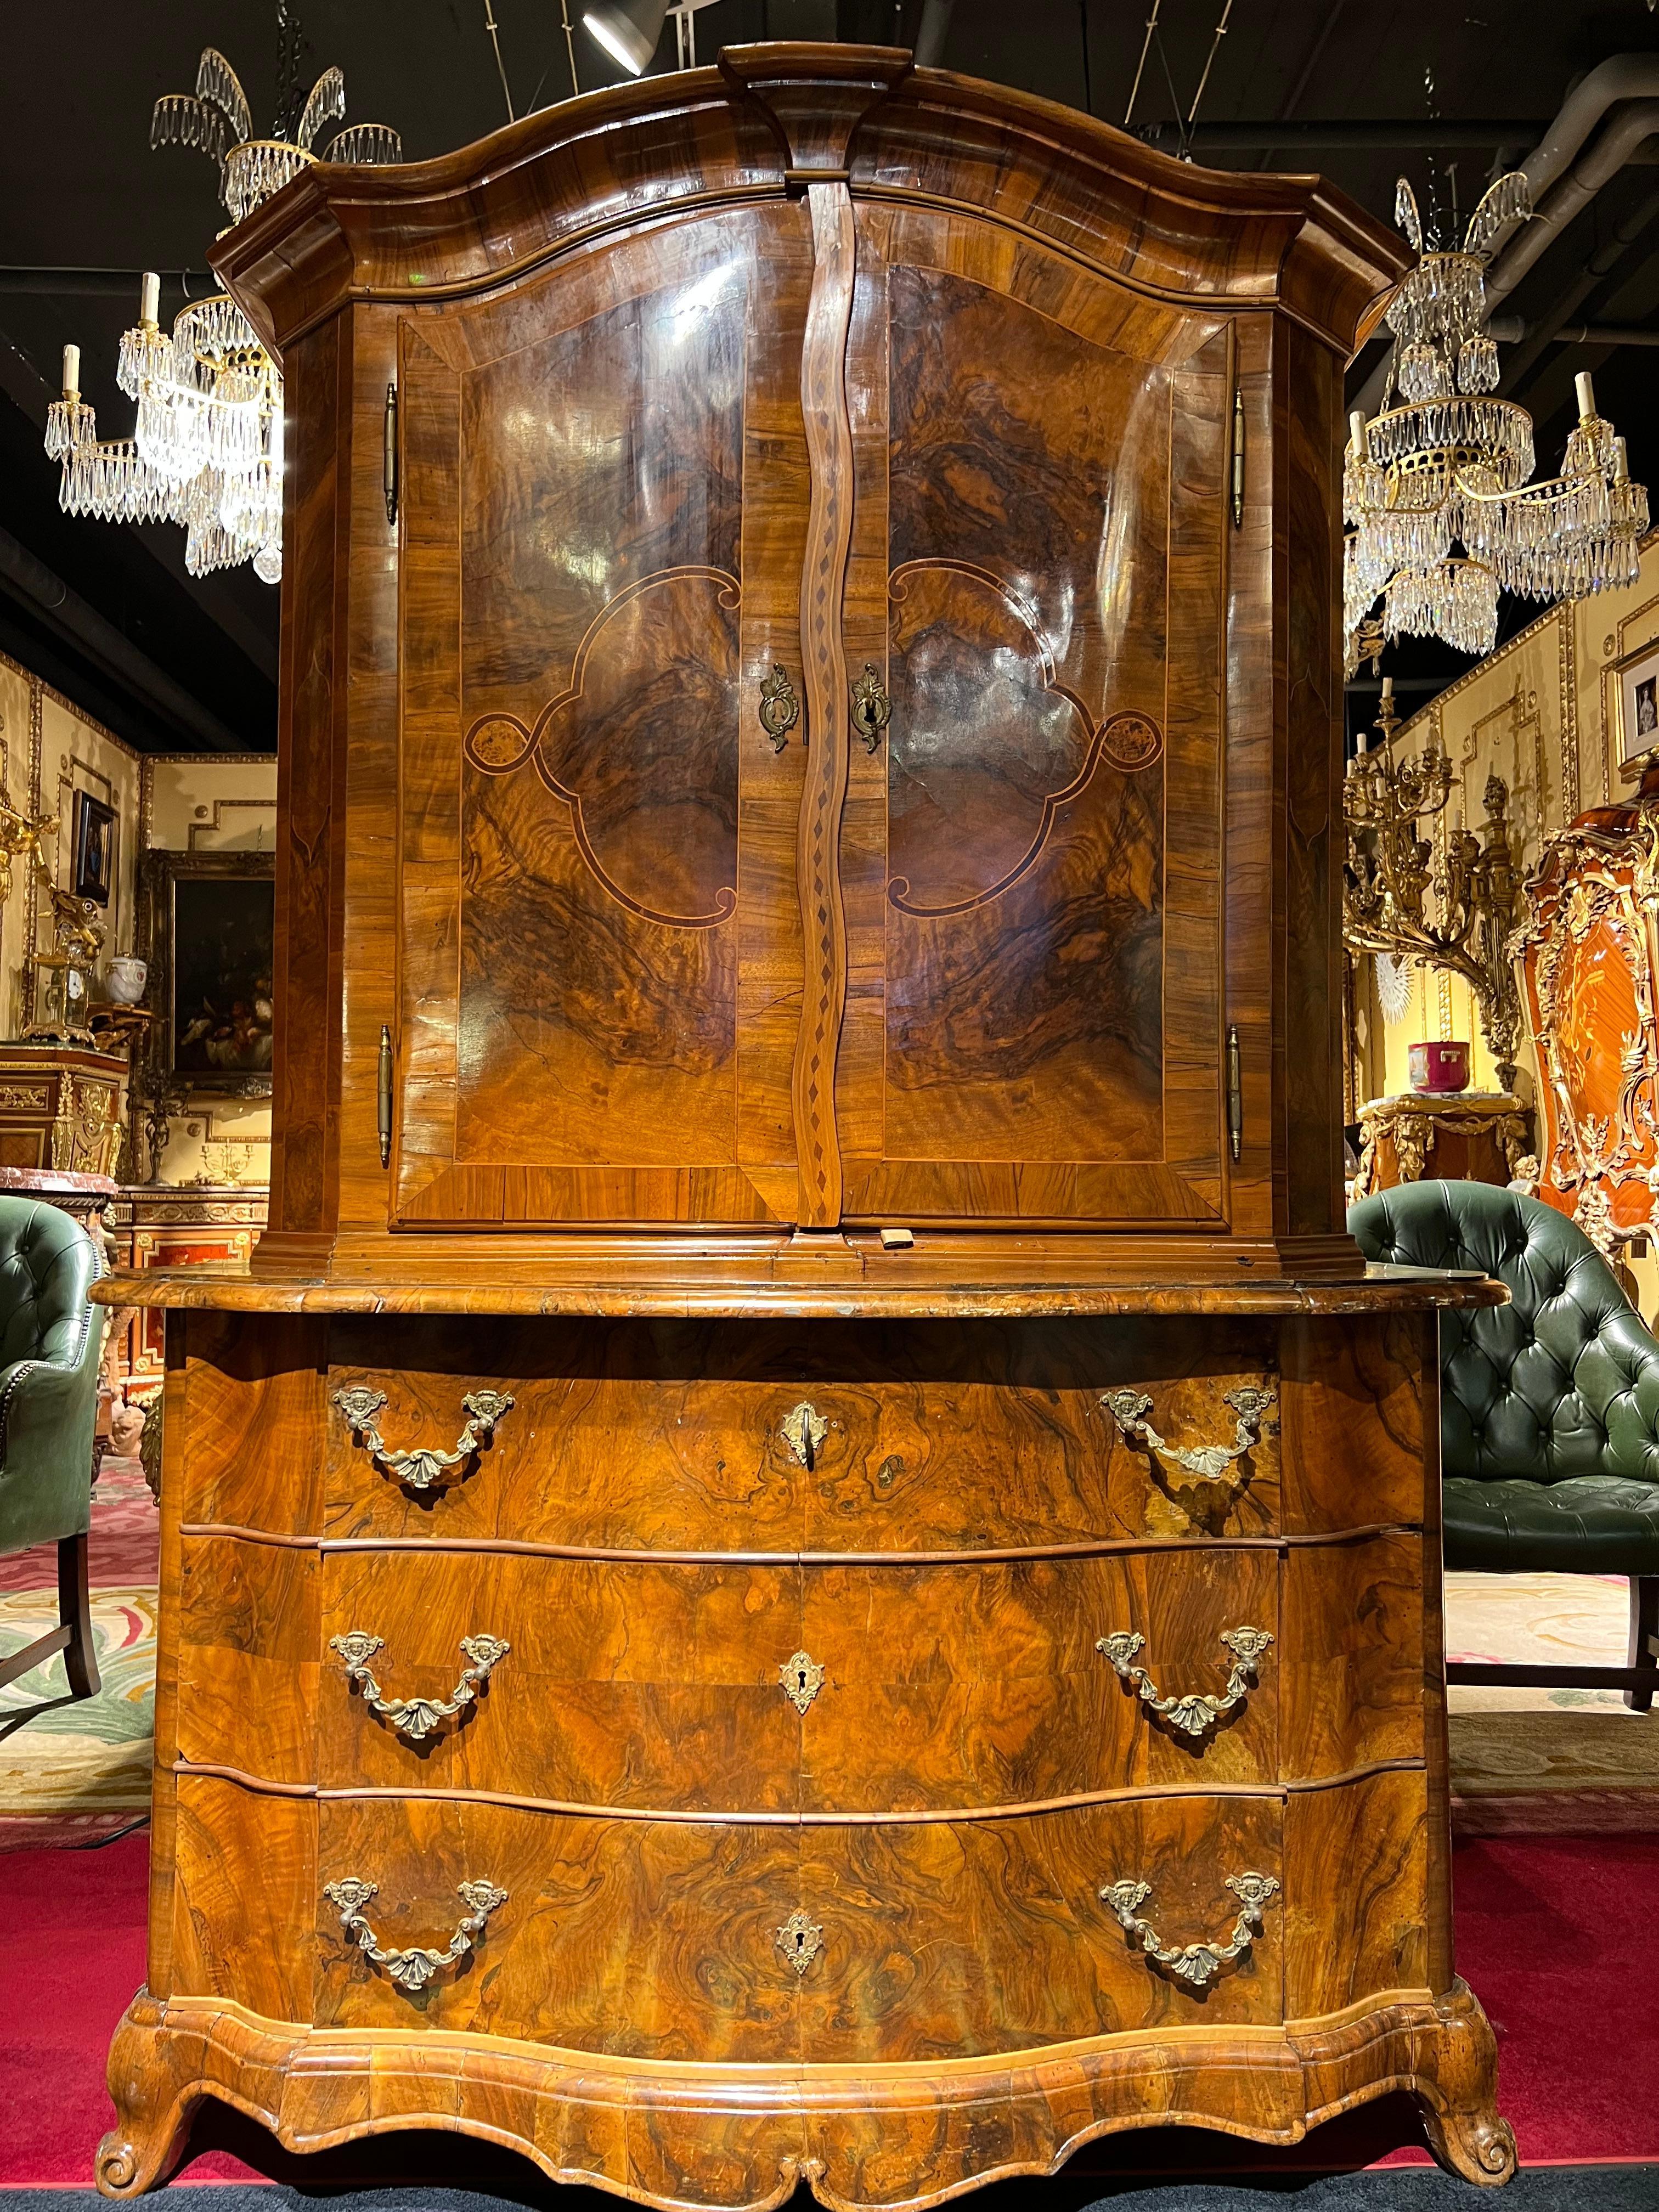 Original Antique Baroque top cabinet around 1780 walnut veneer on solid wood. 2 parts with shellac hand polish. Chests of drawers with 3 curved drawers, upper part with 2 doors. The back wall was renewed and the inside was painted over.